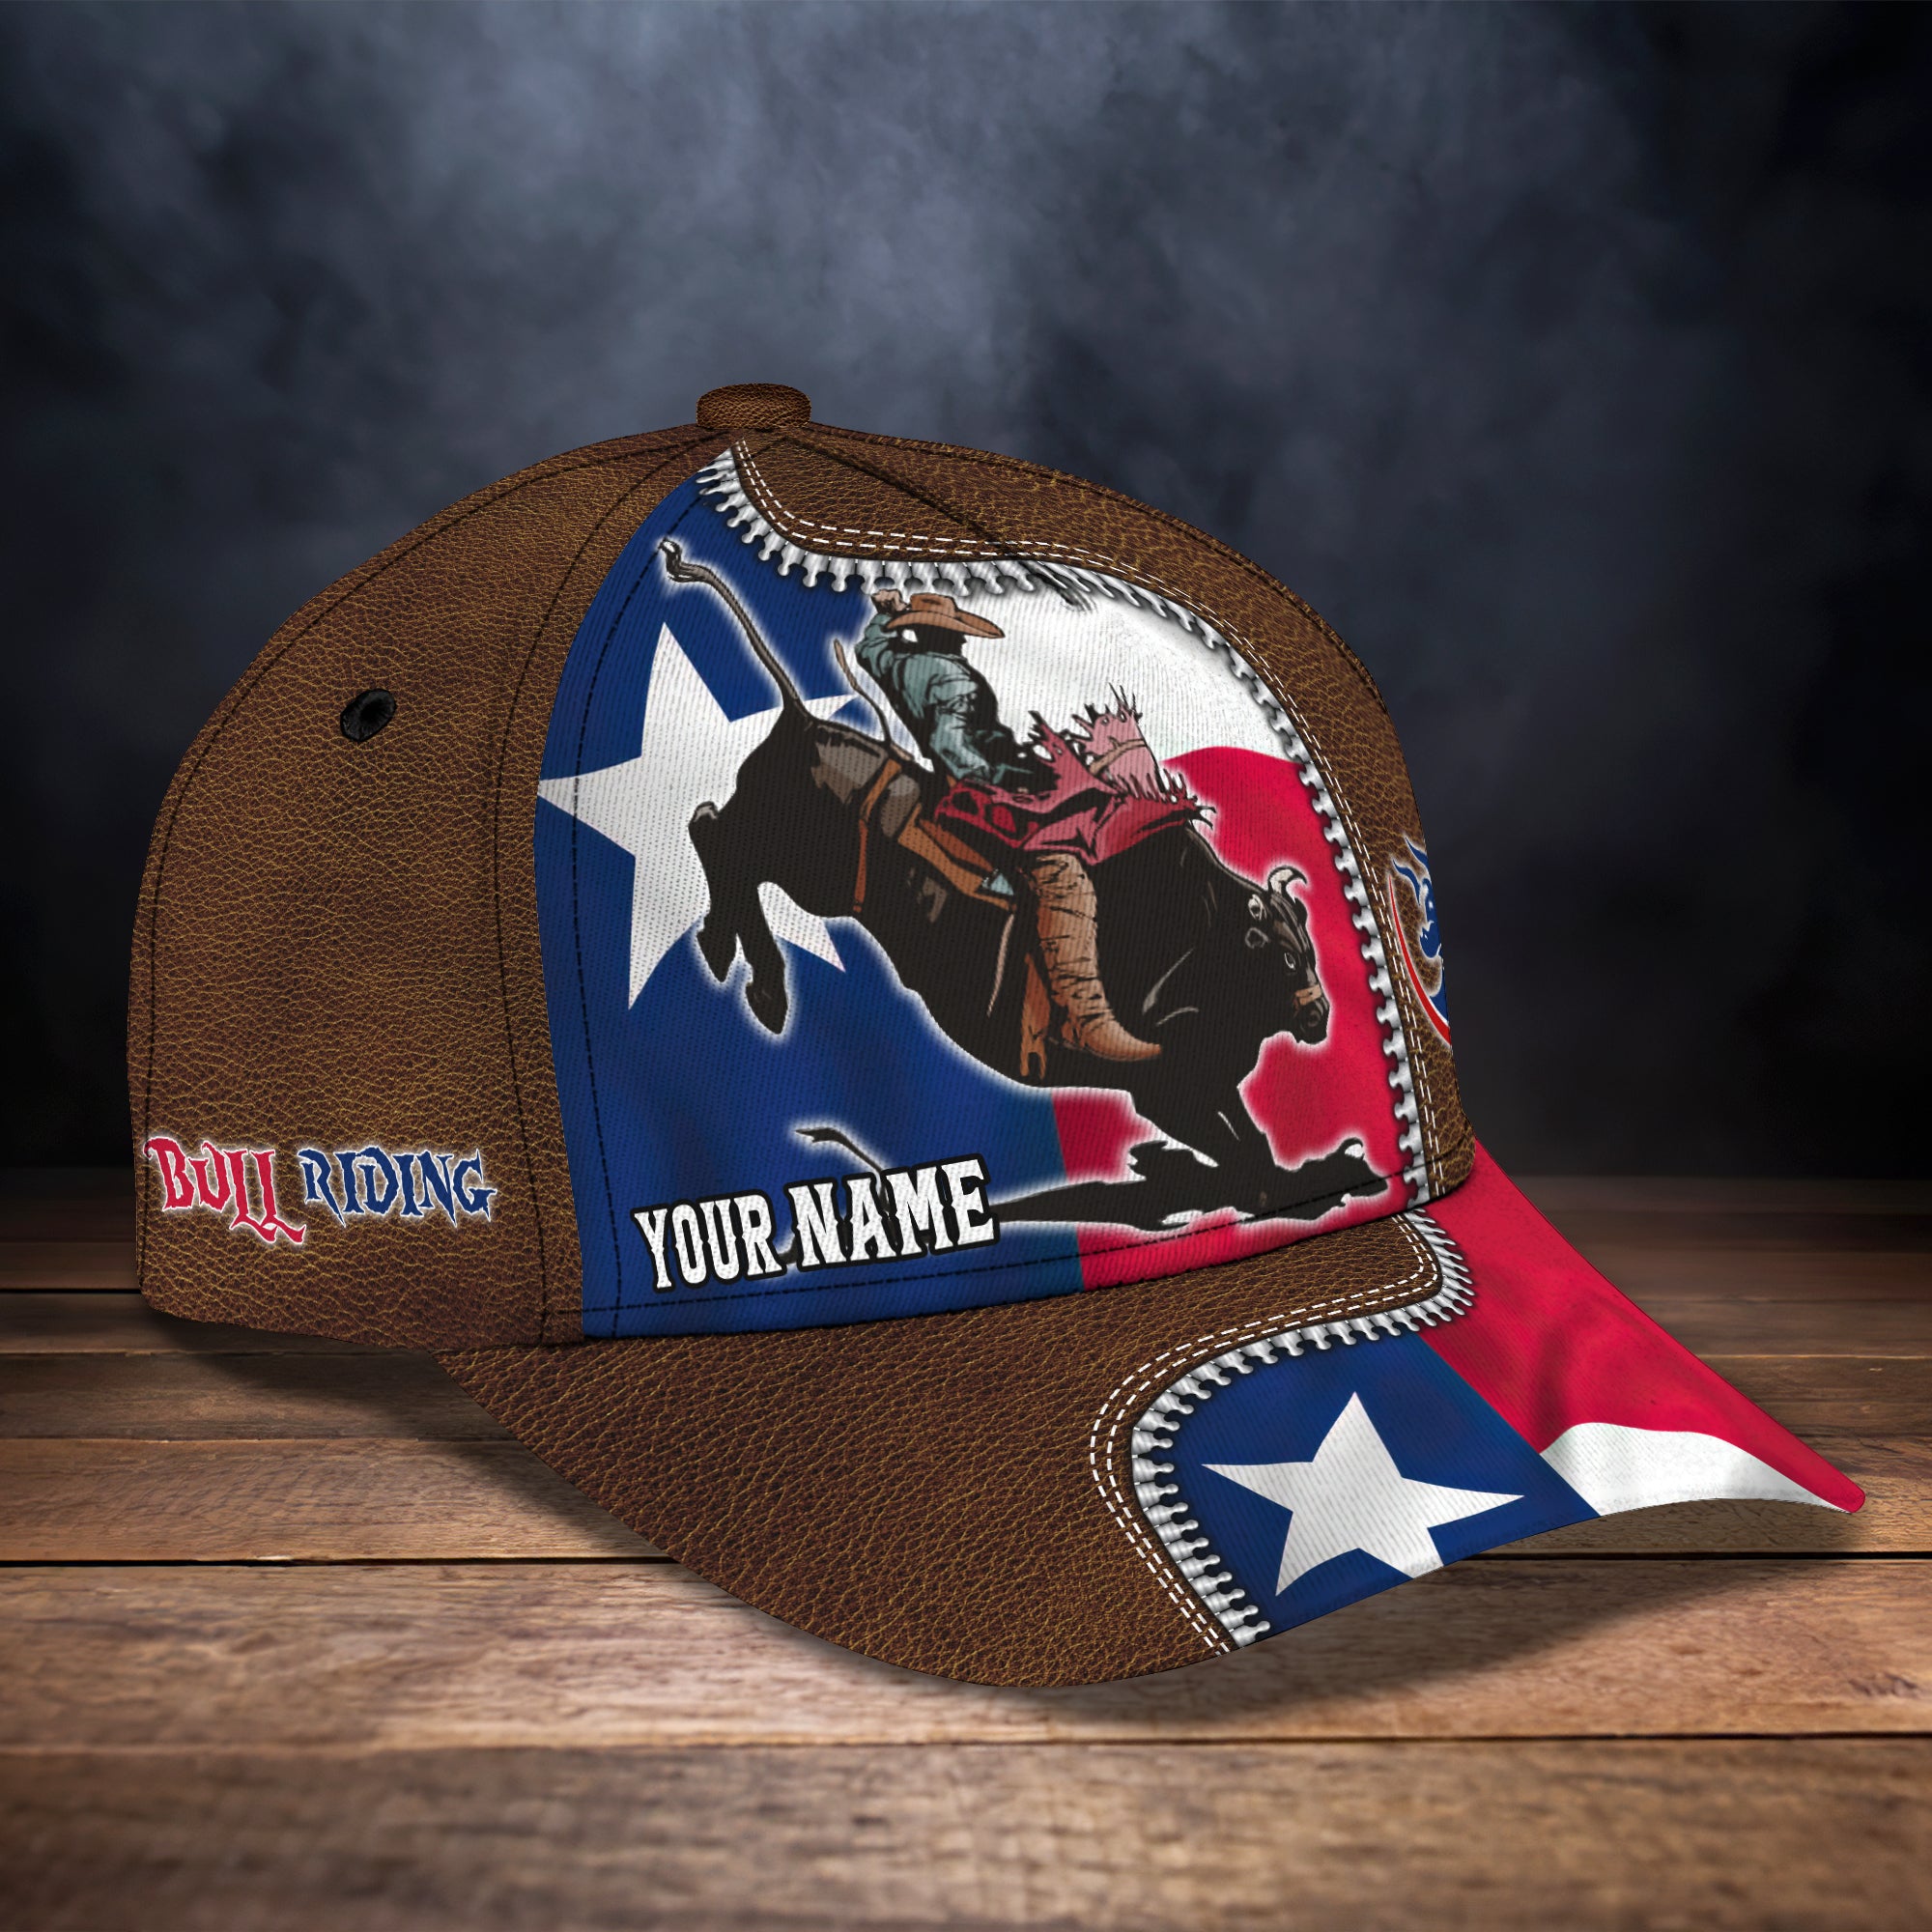 Bull Riding Texas 03 - Personalized Name Cap - Nsd99